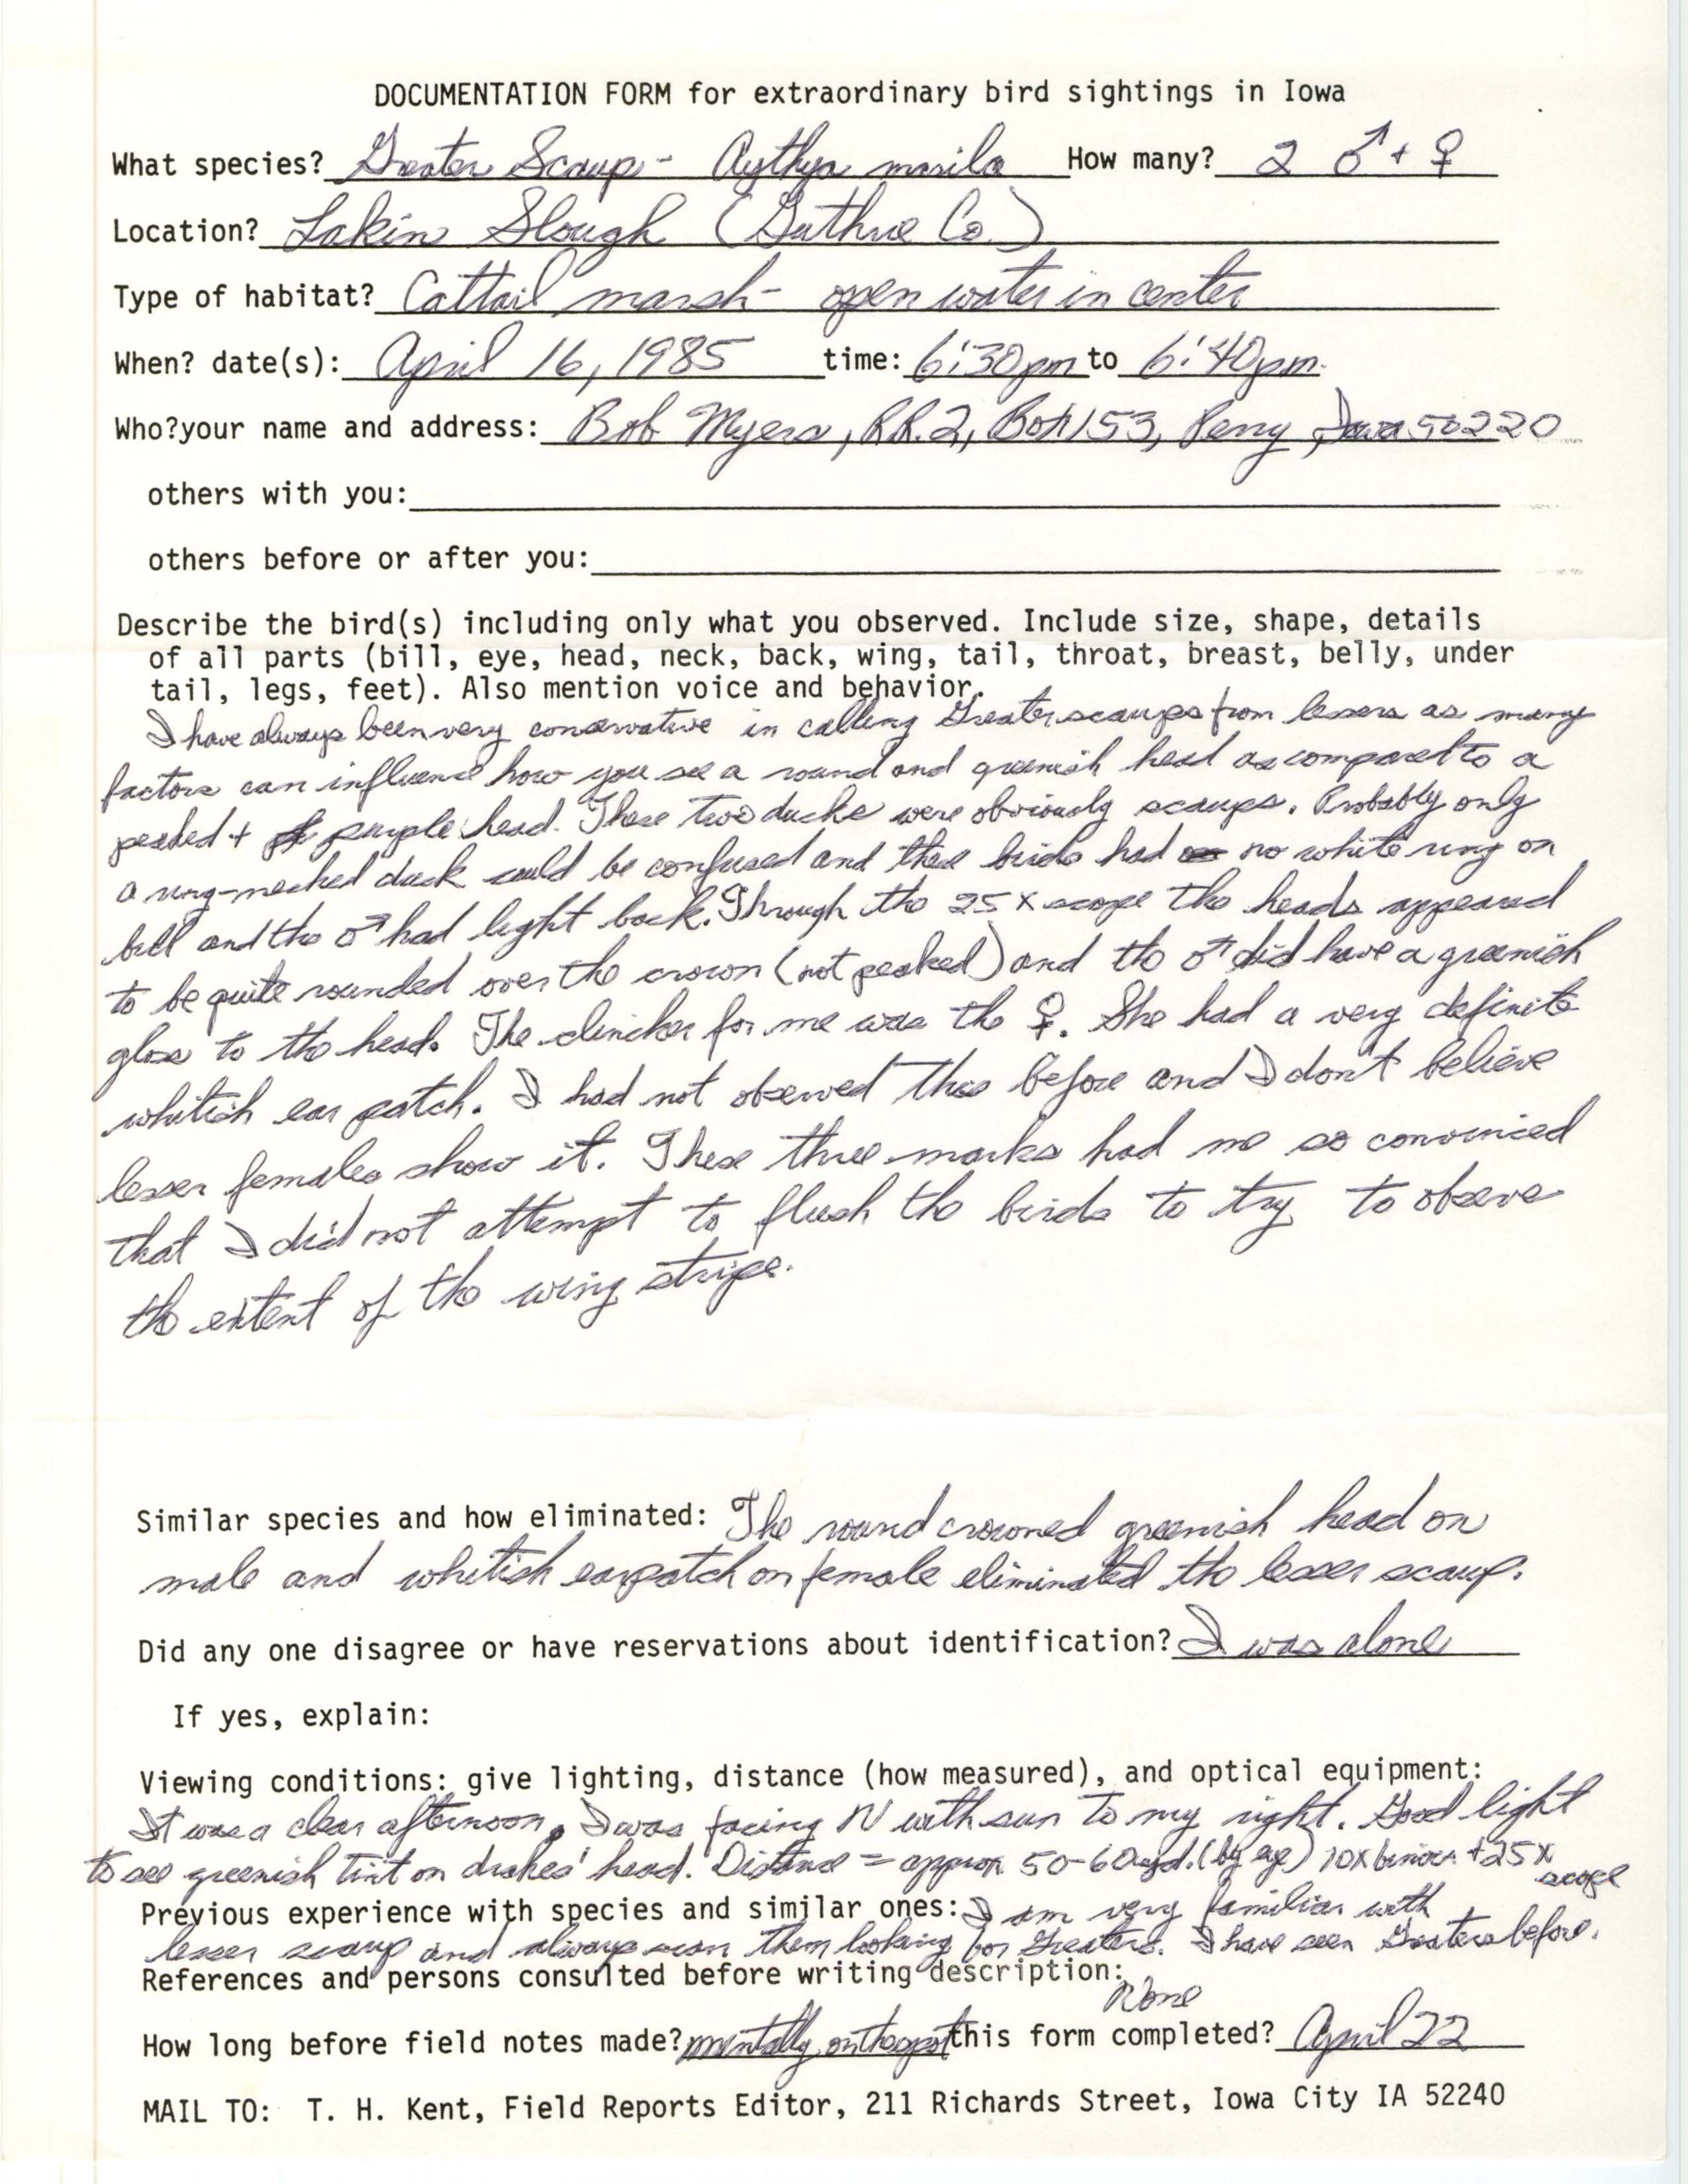 Rare bird documentation form for Greater Scaup at Lakin Slough, 1985